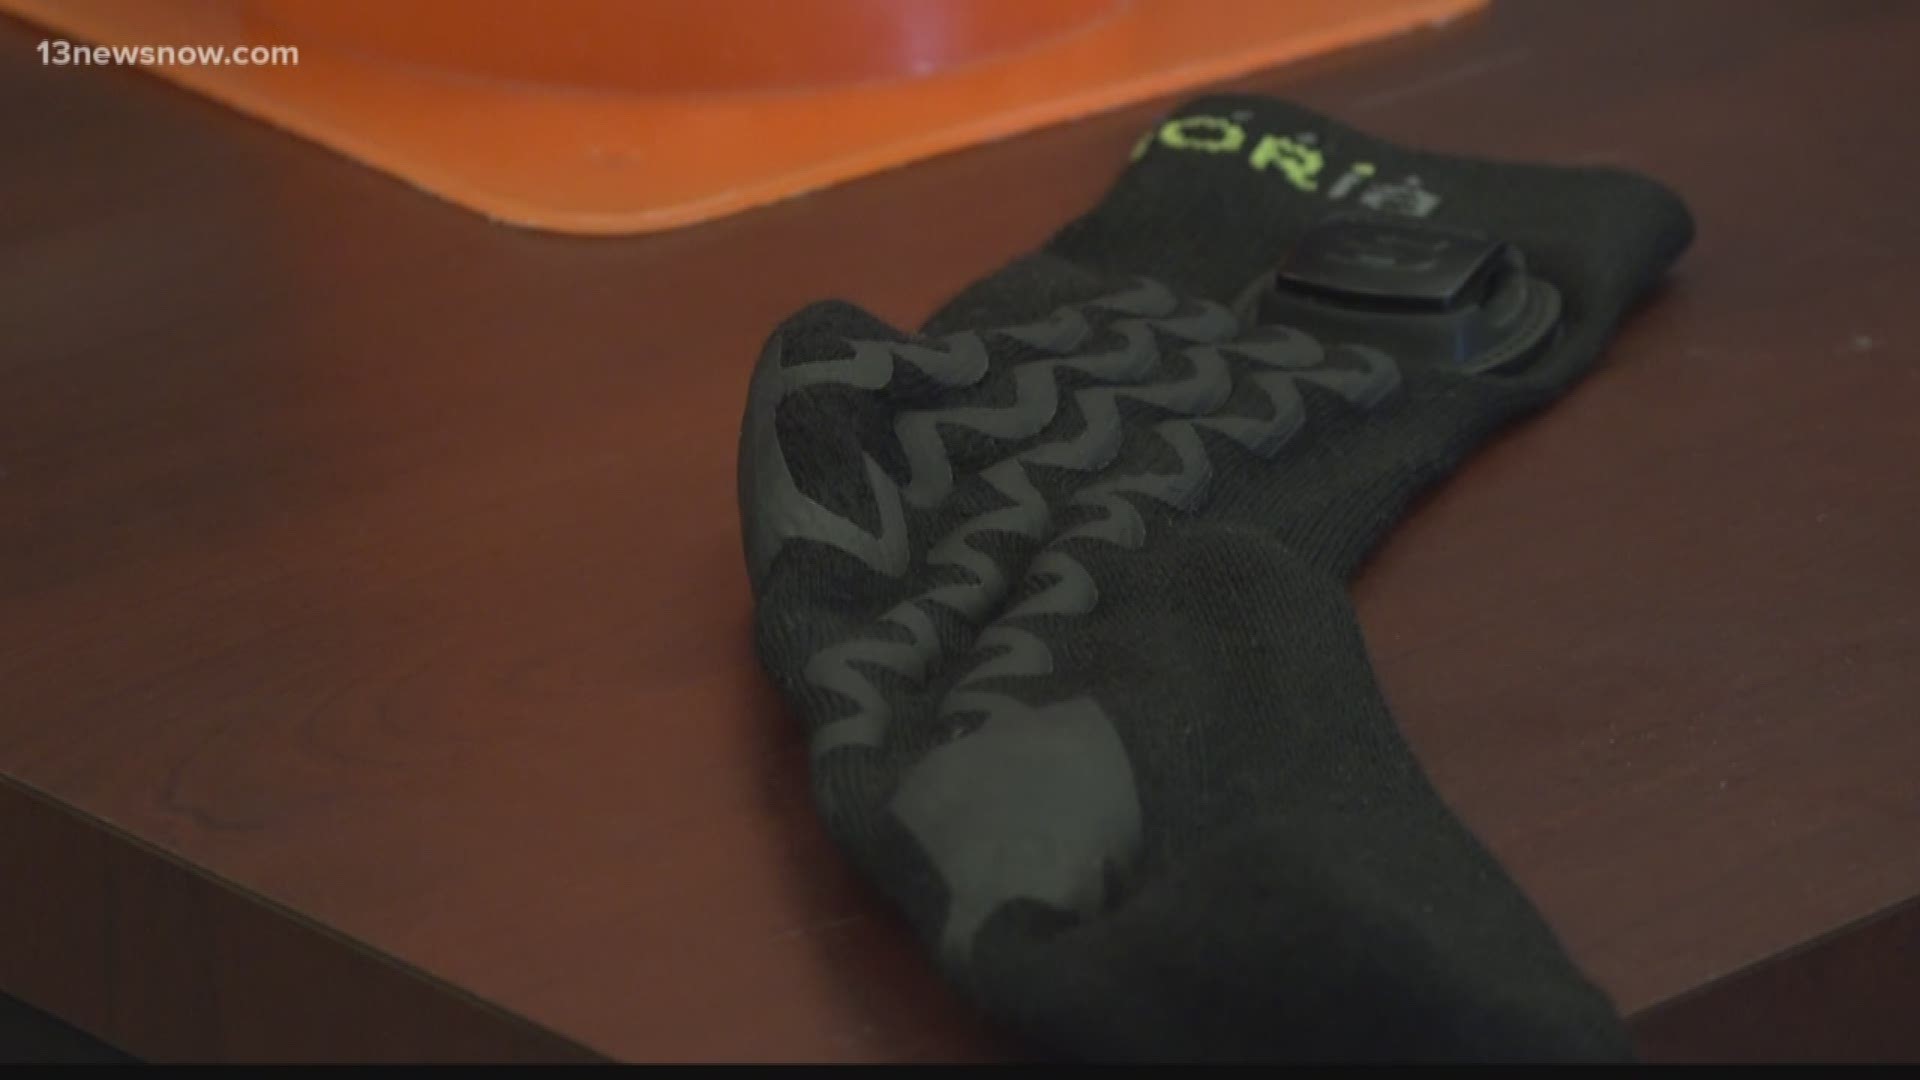 Students are using a fitness sock for science.